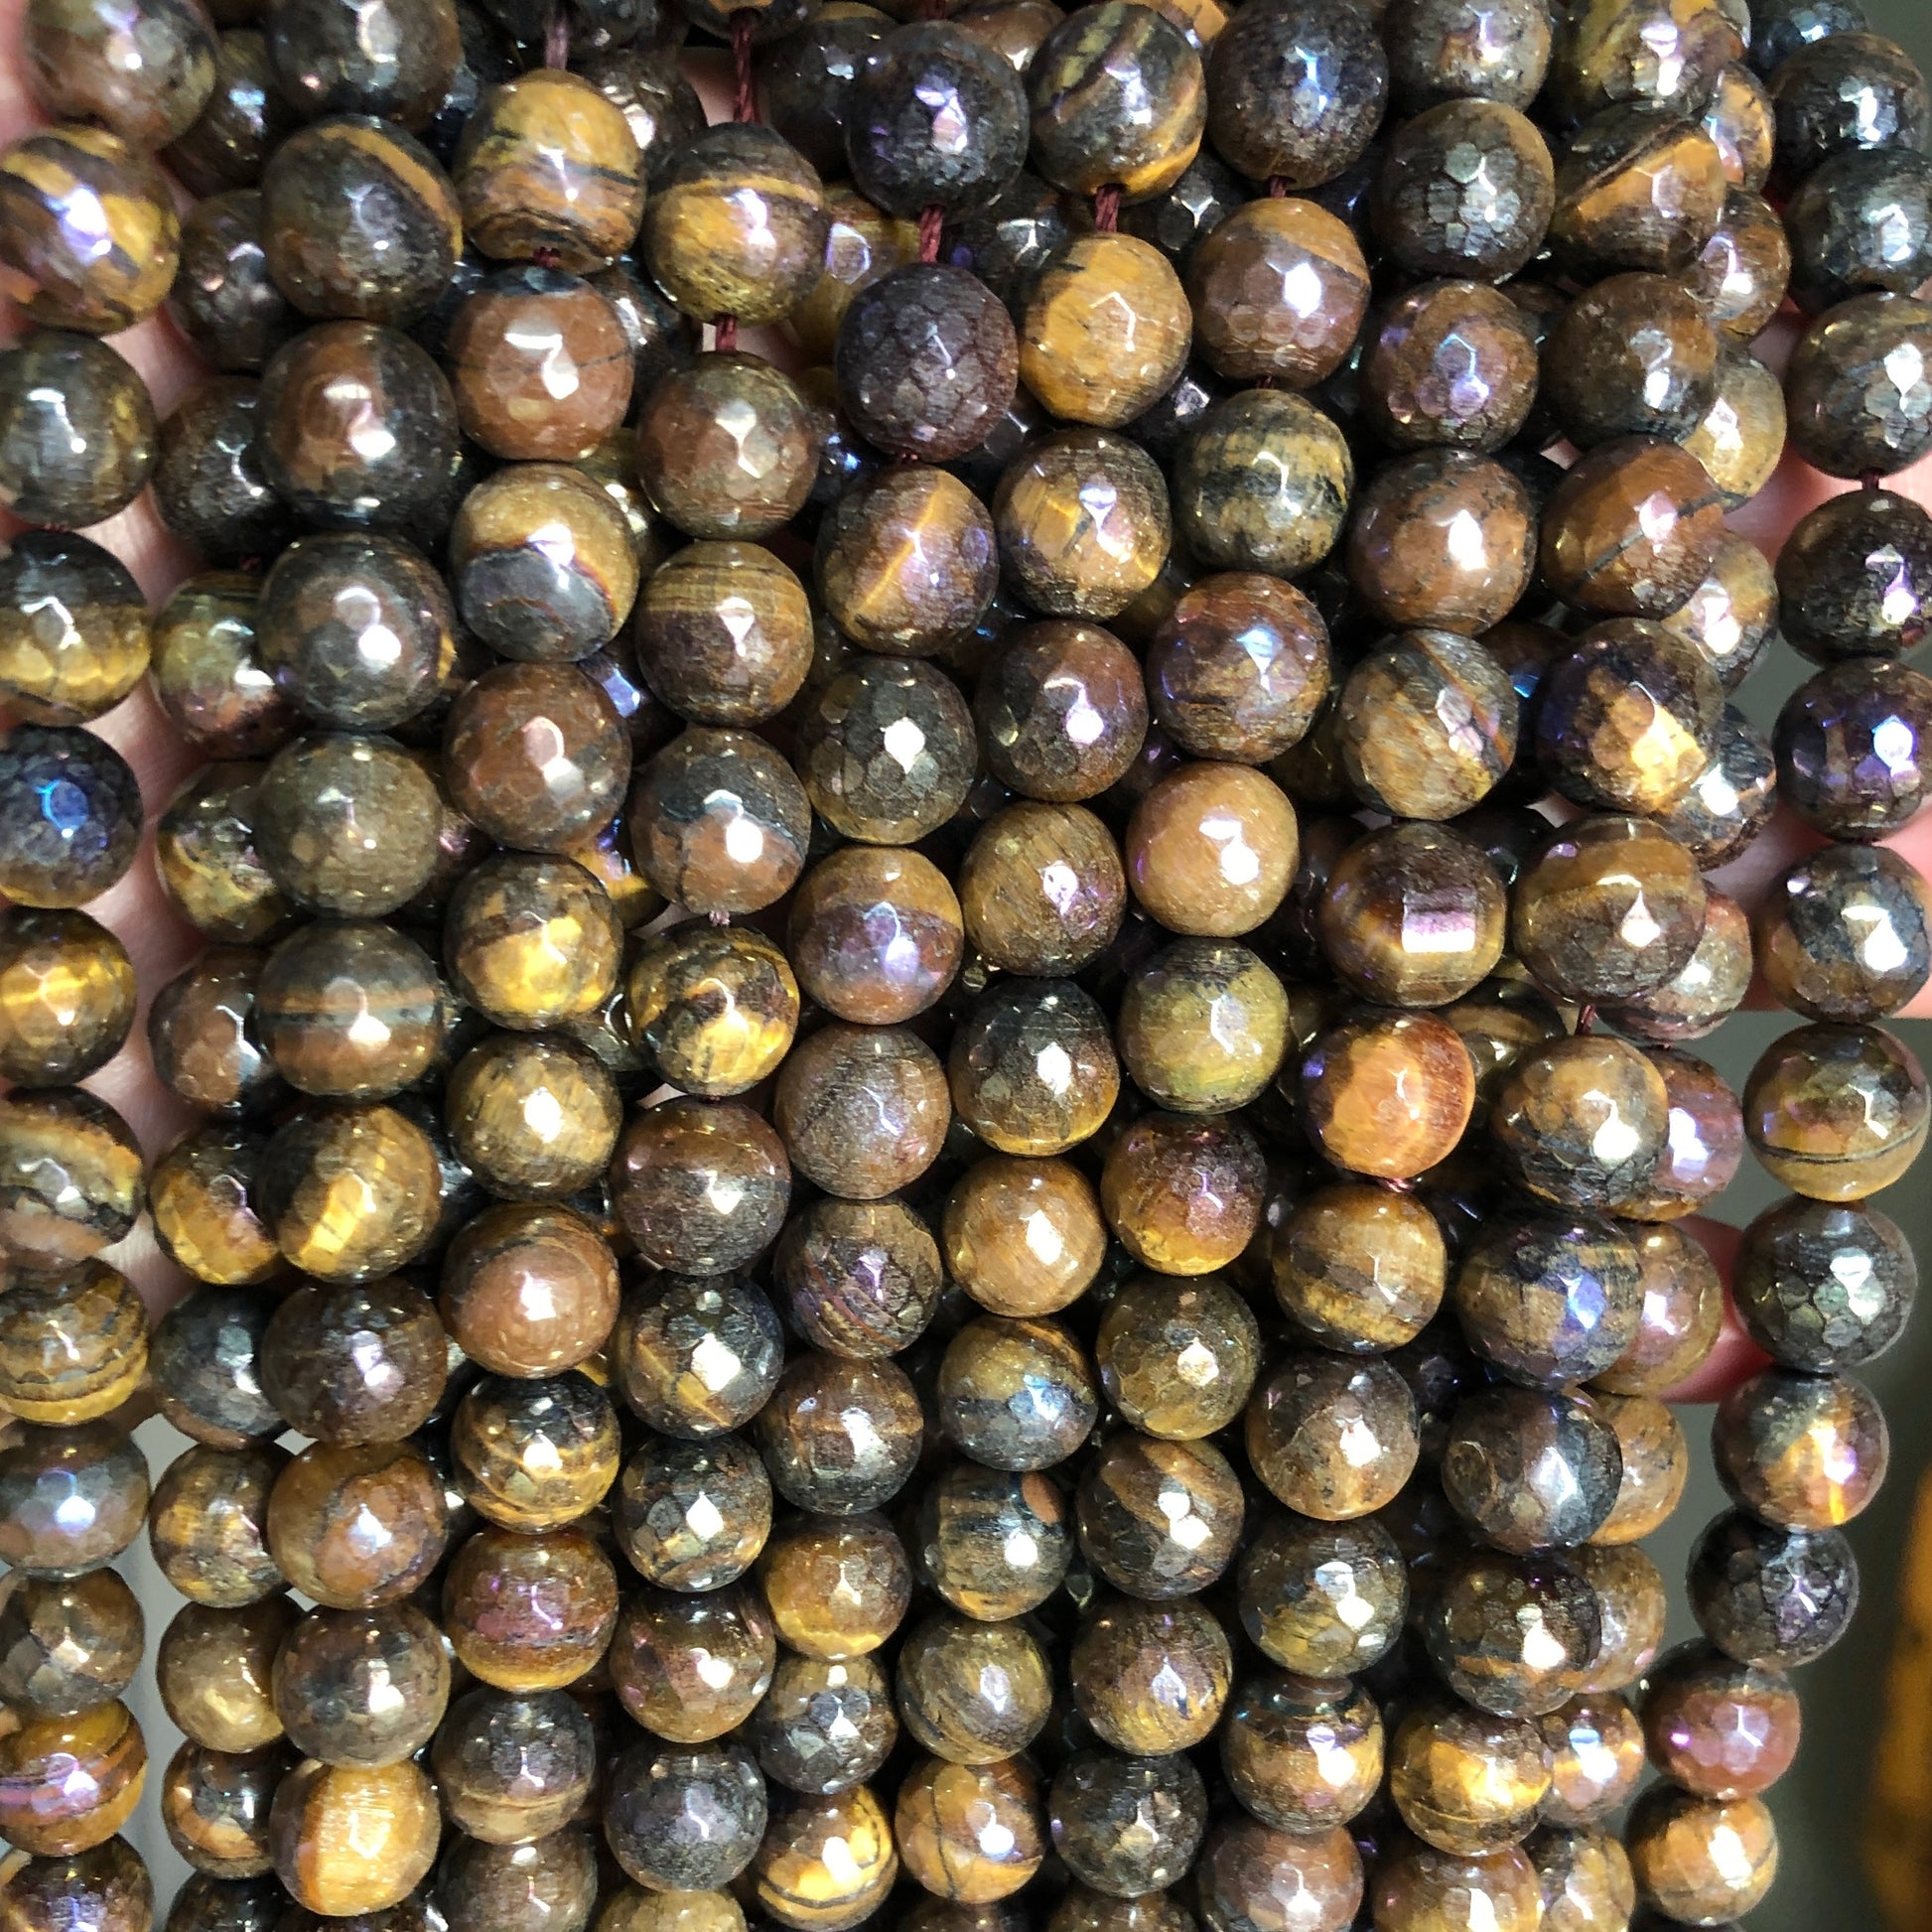 2 strands/lot 10mm Electroplated AB Brown Tiger Eye Faceted Stone Beads Stone Beads New Beads Arrivals Tiger Eye Beads Charms Beads Beyond